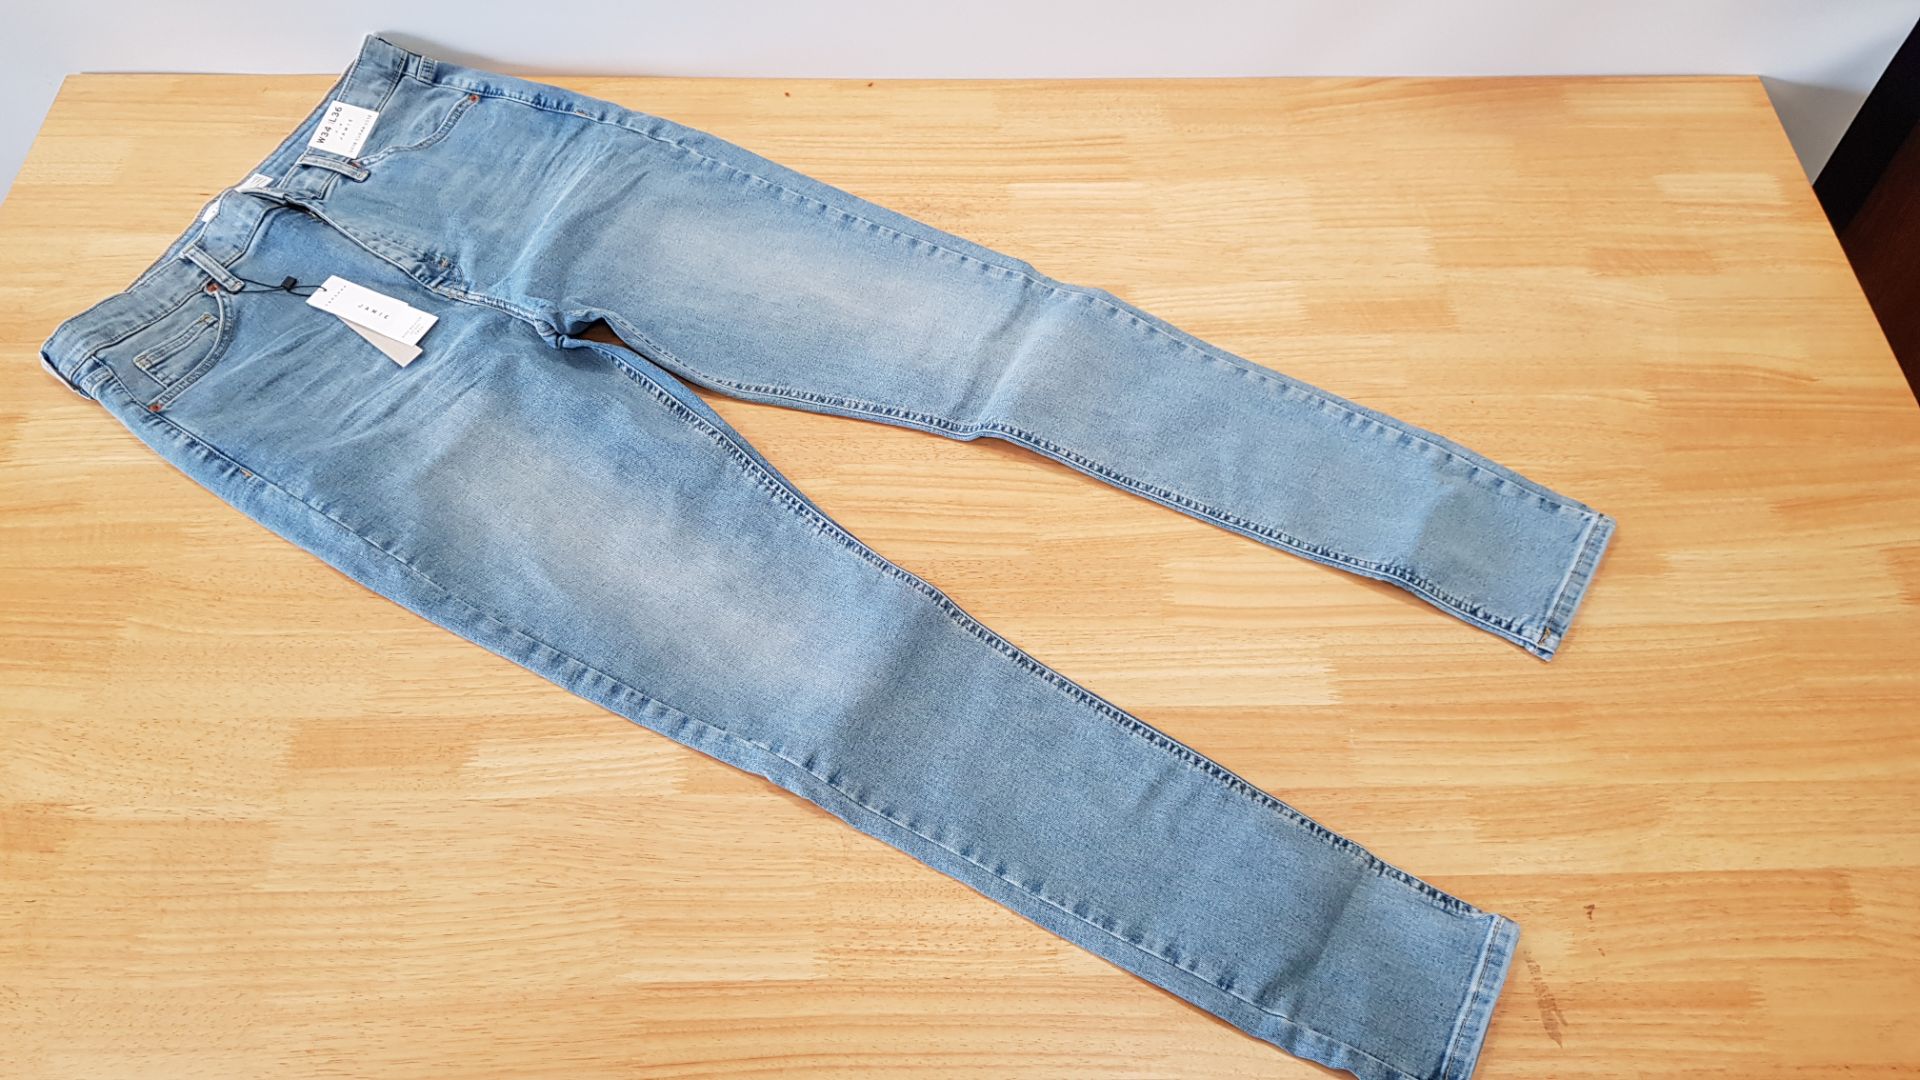 12 X BRAND NEW TOPSHOP JAMIE HIGH WAISTED SKINNY TALL JEANS UK SIZE 10 RRP £40.00 (TOTAL RRP £480.